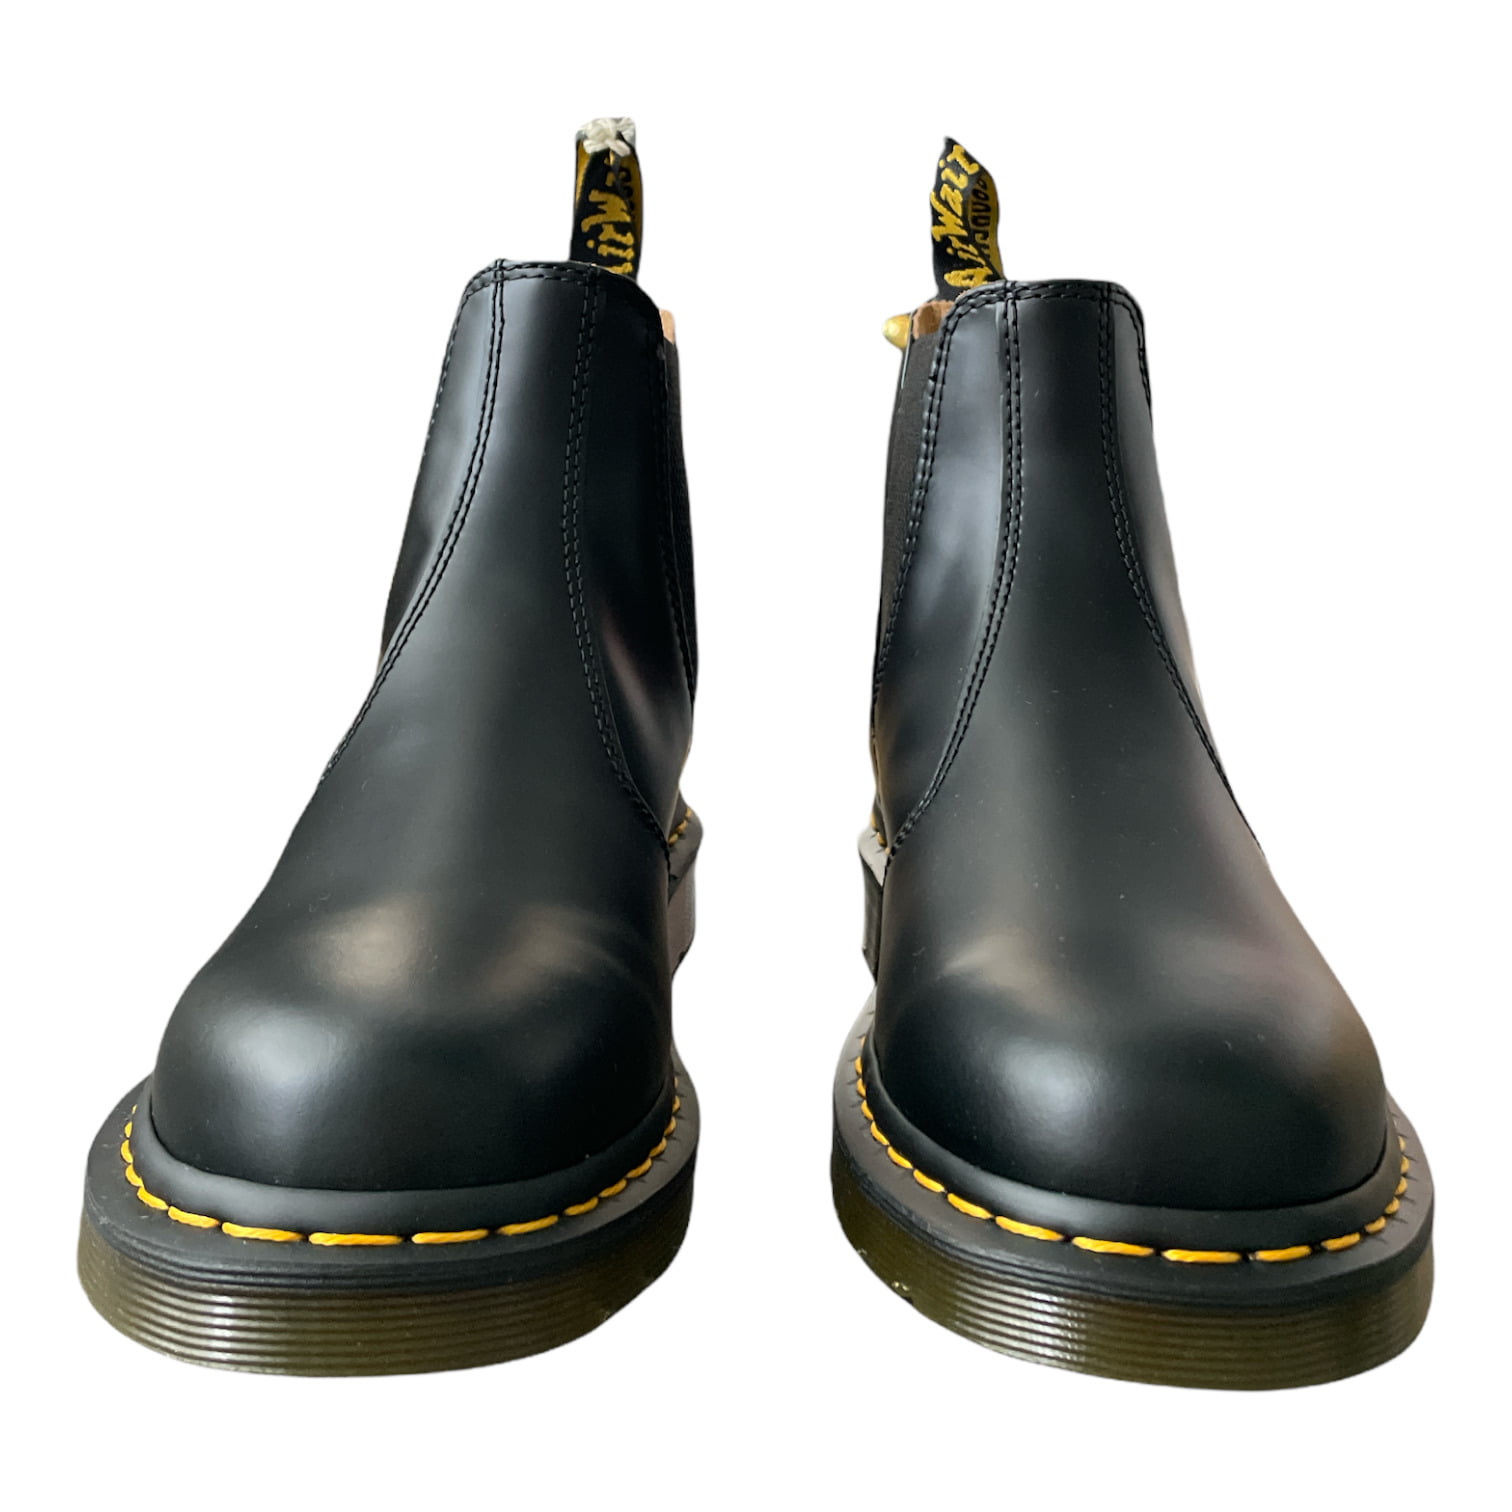 Dr. Martens, 2976 Leather Chelsea Boot for Men and Women